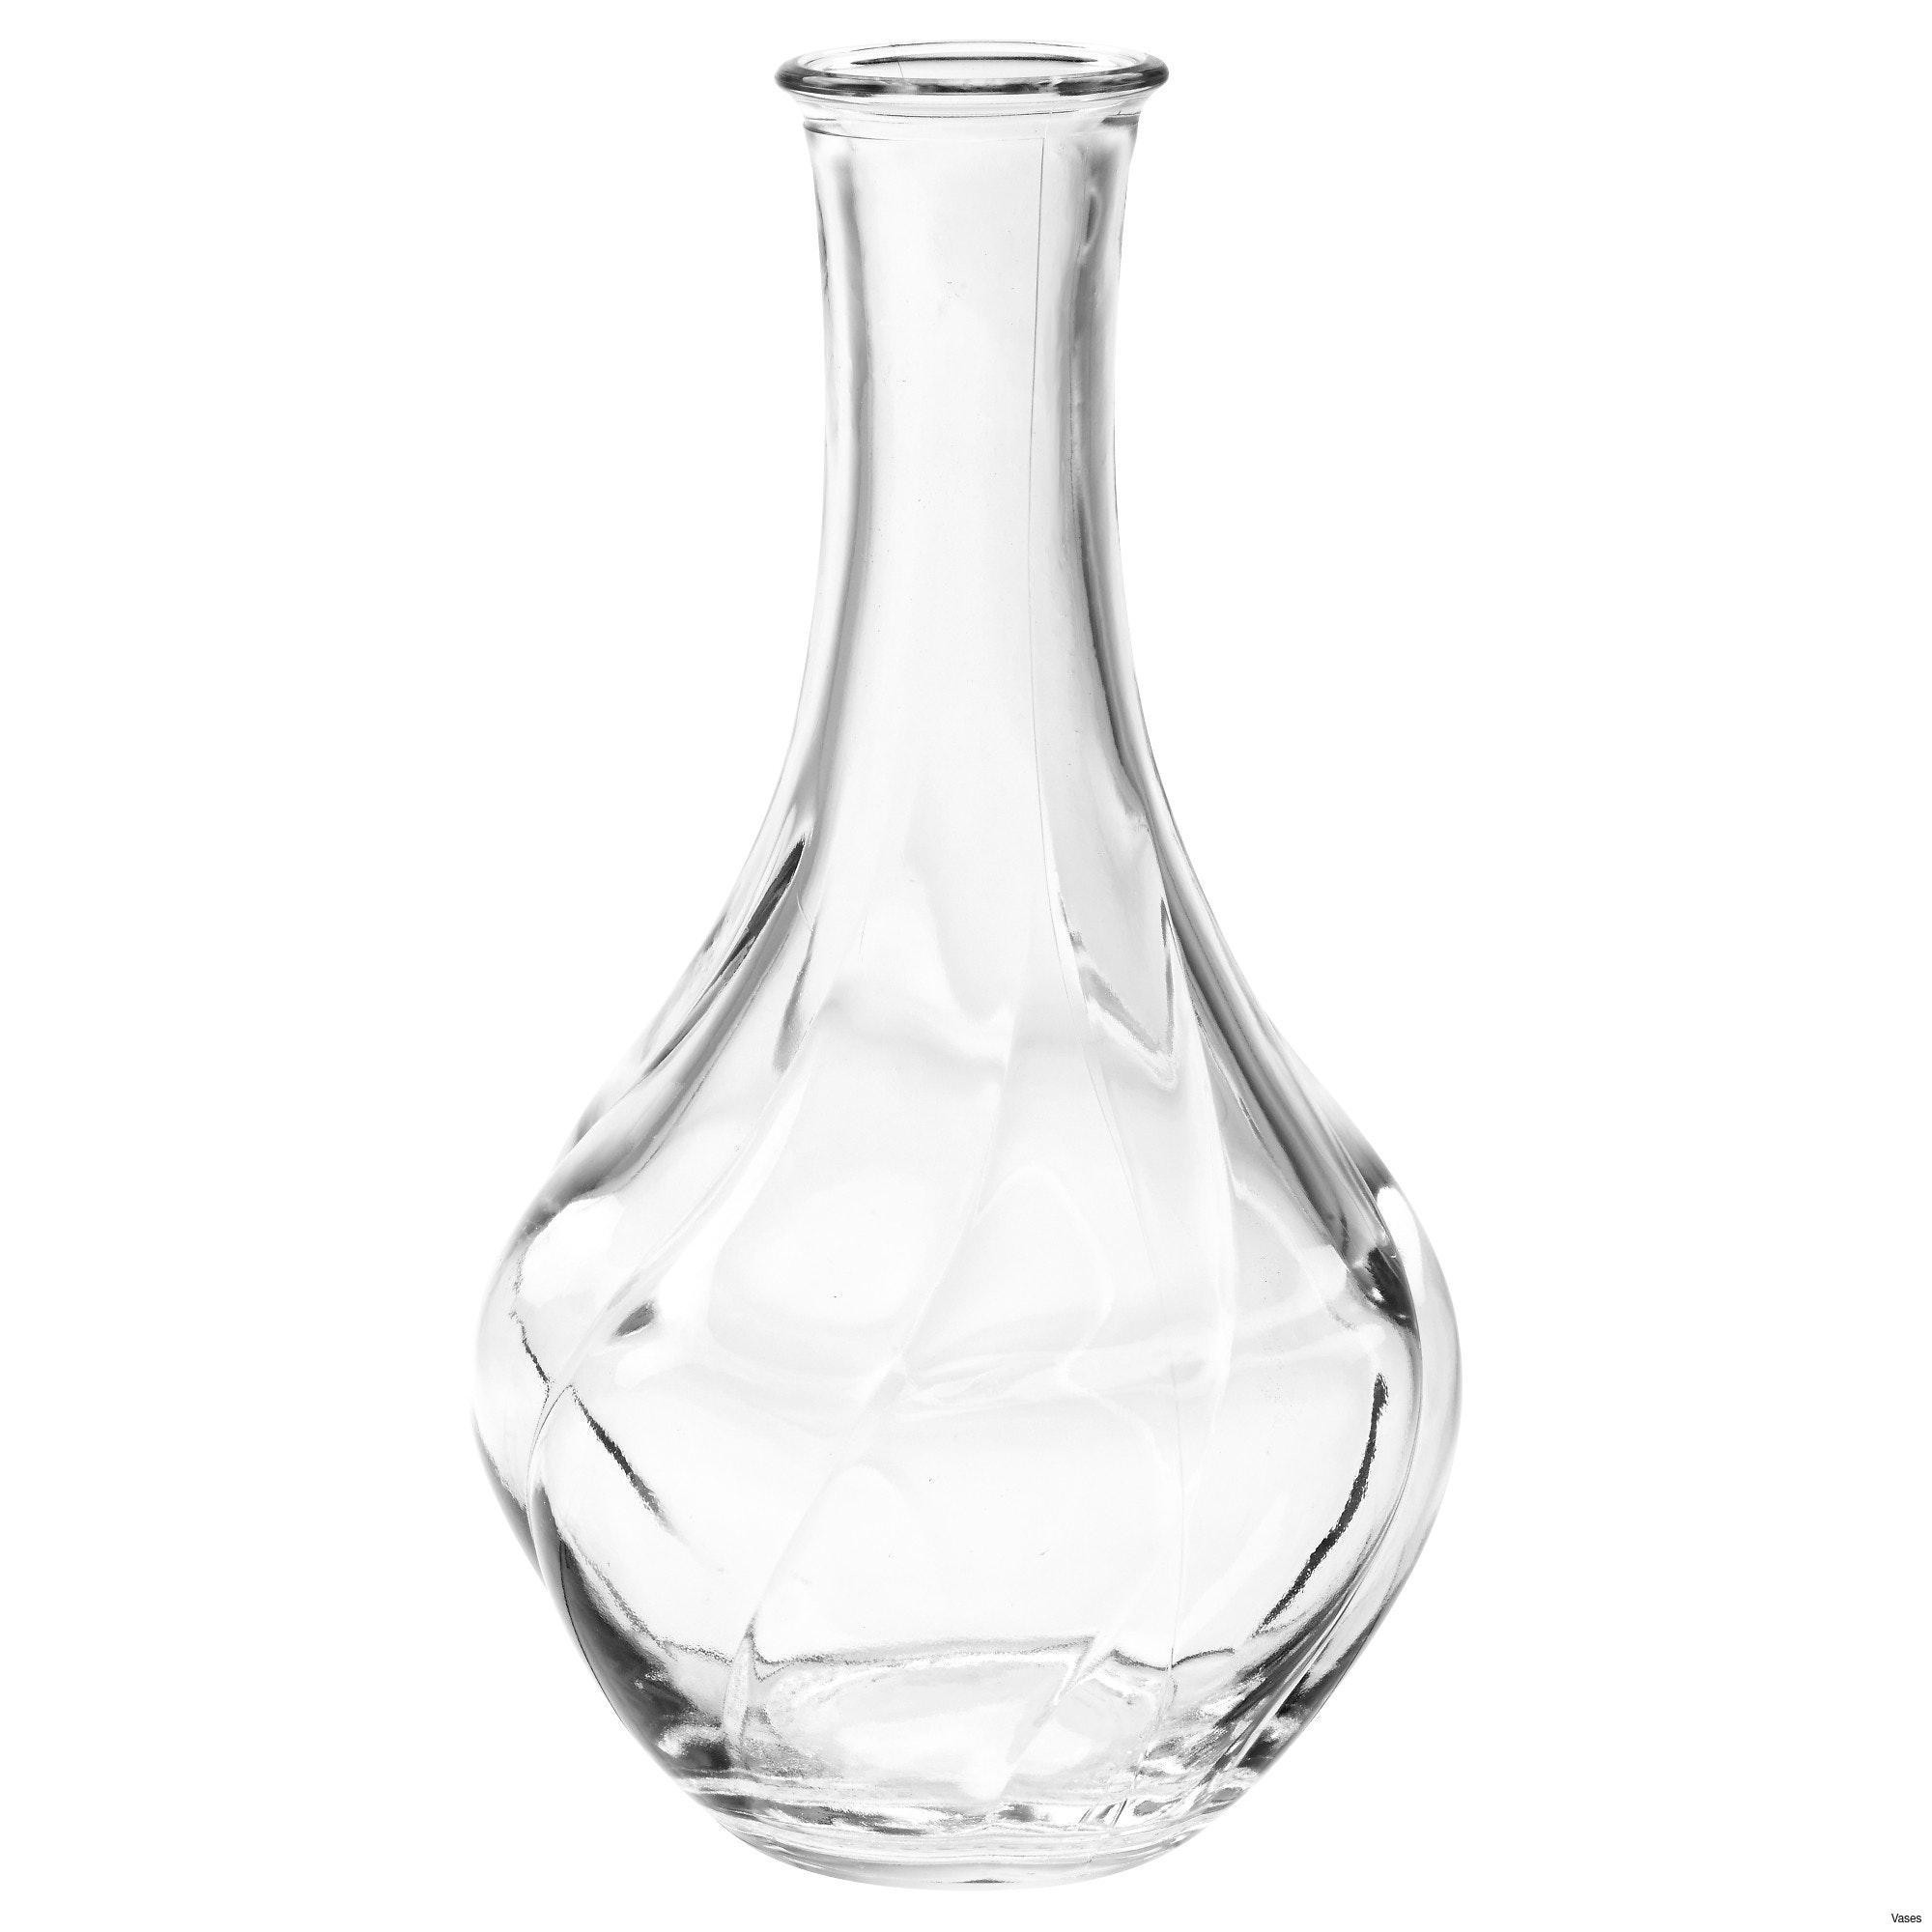 12 Fabulous Head Vases for Sale 2024 free download head vases for sale of large black vase stock 30 trendy black vases for sale vases with regard to large black vase collection living room glass vases fresh clear vase 0d tags amazing and of